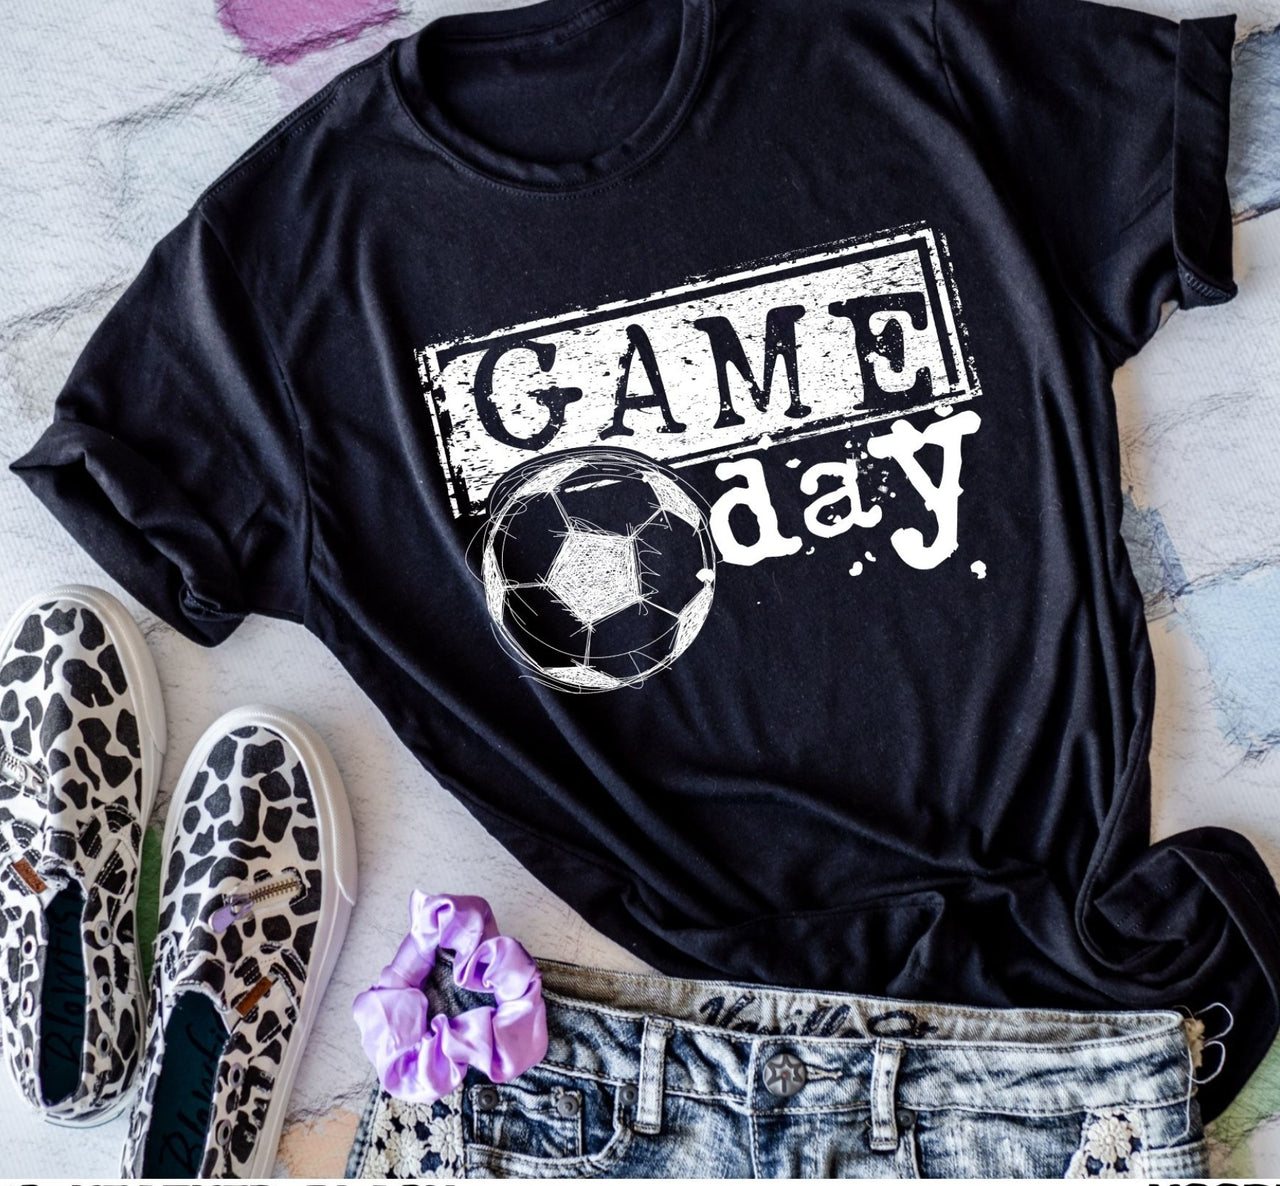 Game Day (Soccer) - Unisex Tee (You pick tee color)